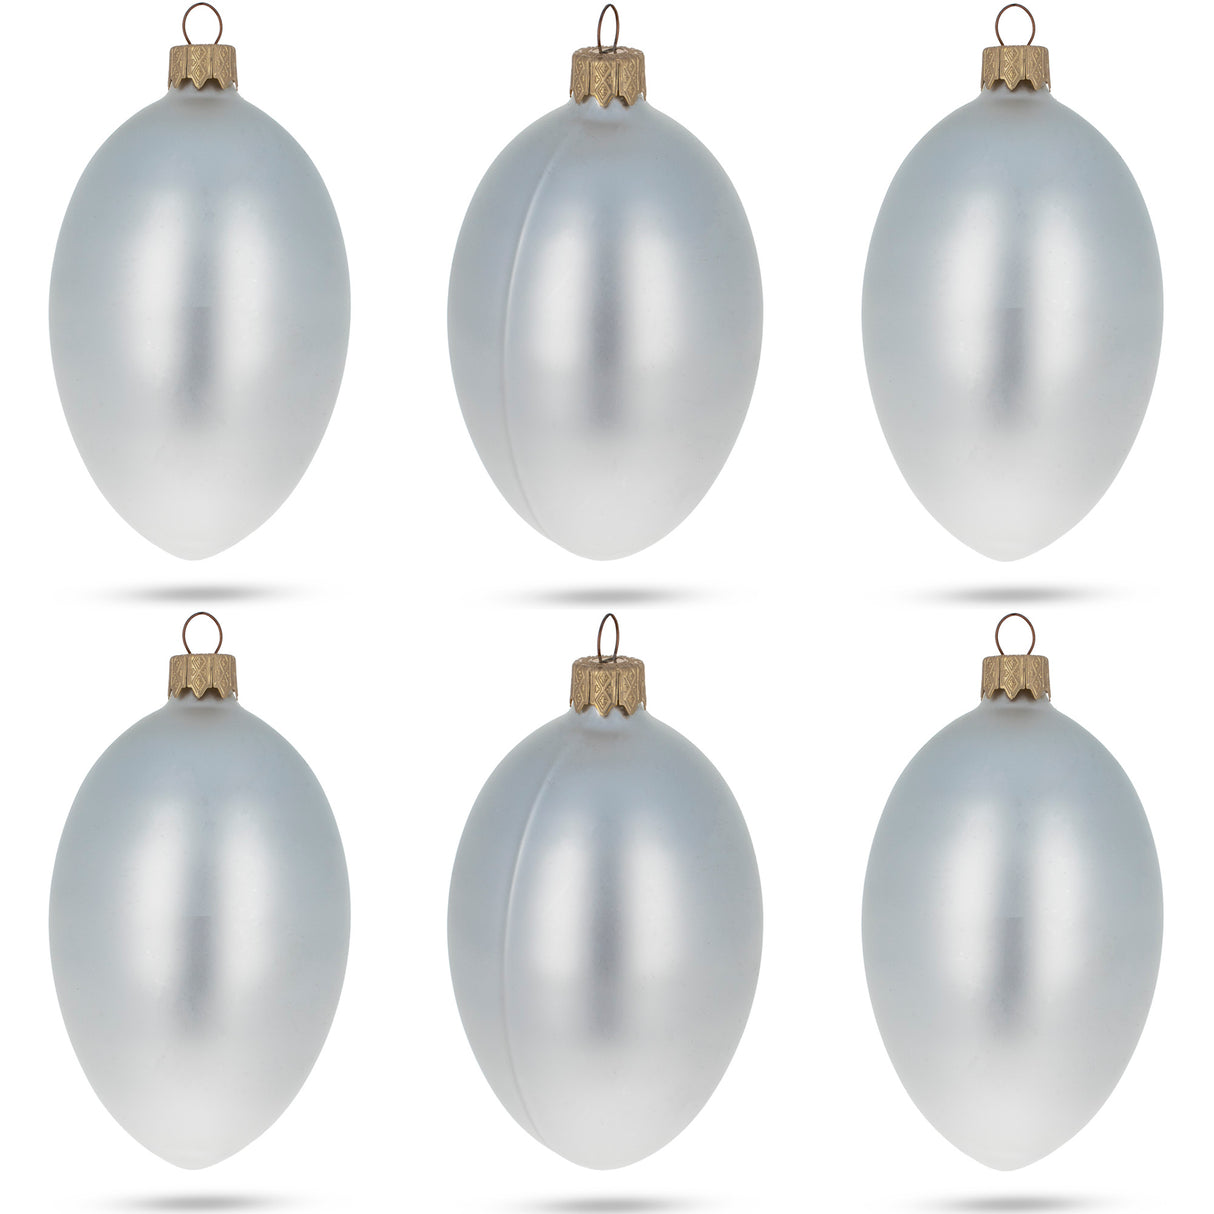 Set of 6 White Matte Glass Egg Ornaments 4 Inches in White color, Oval shape